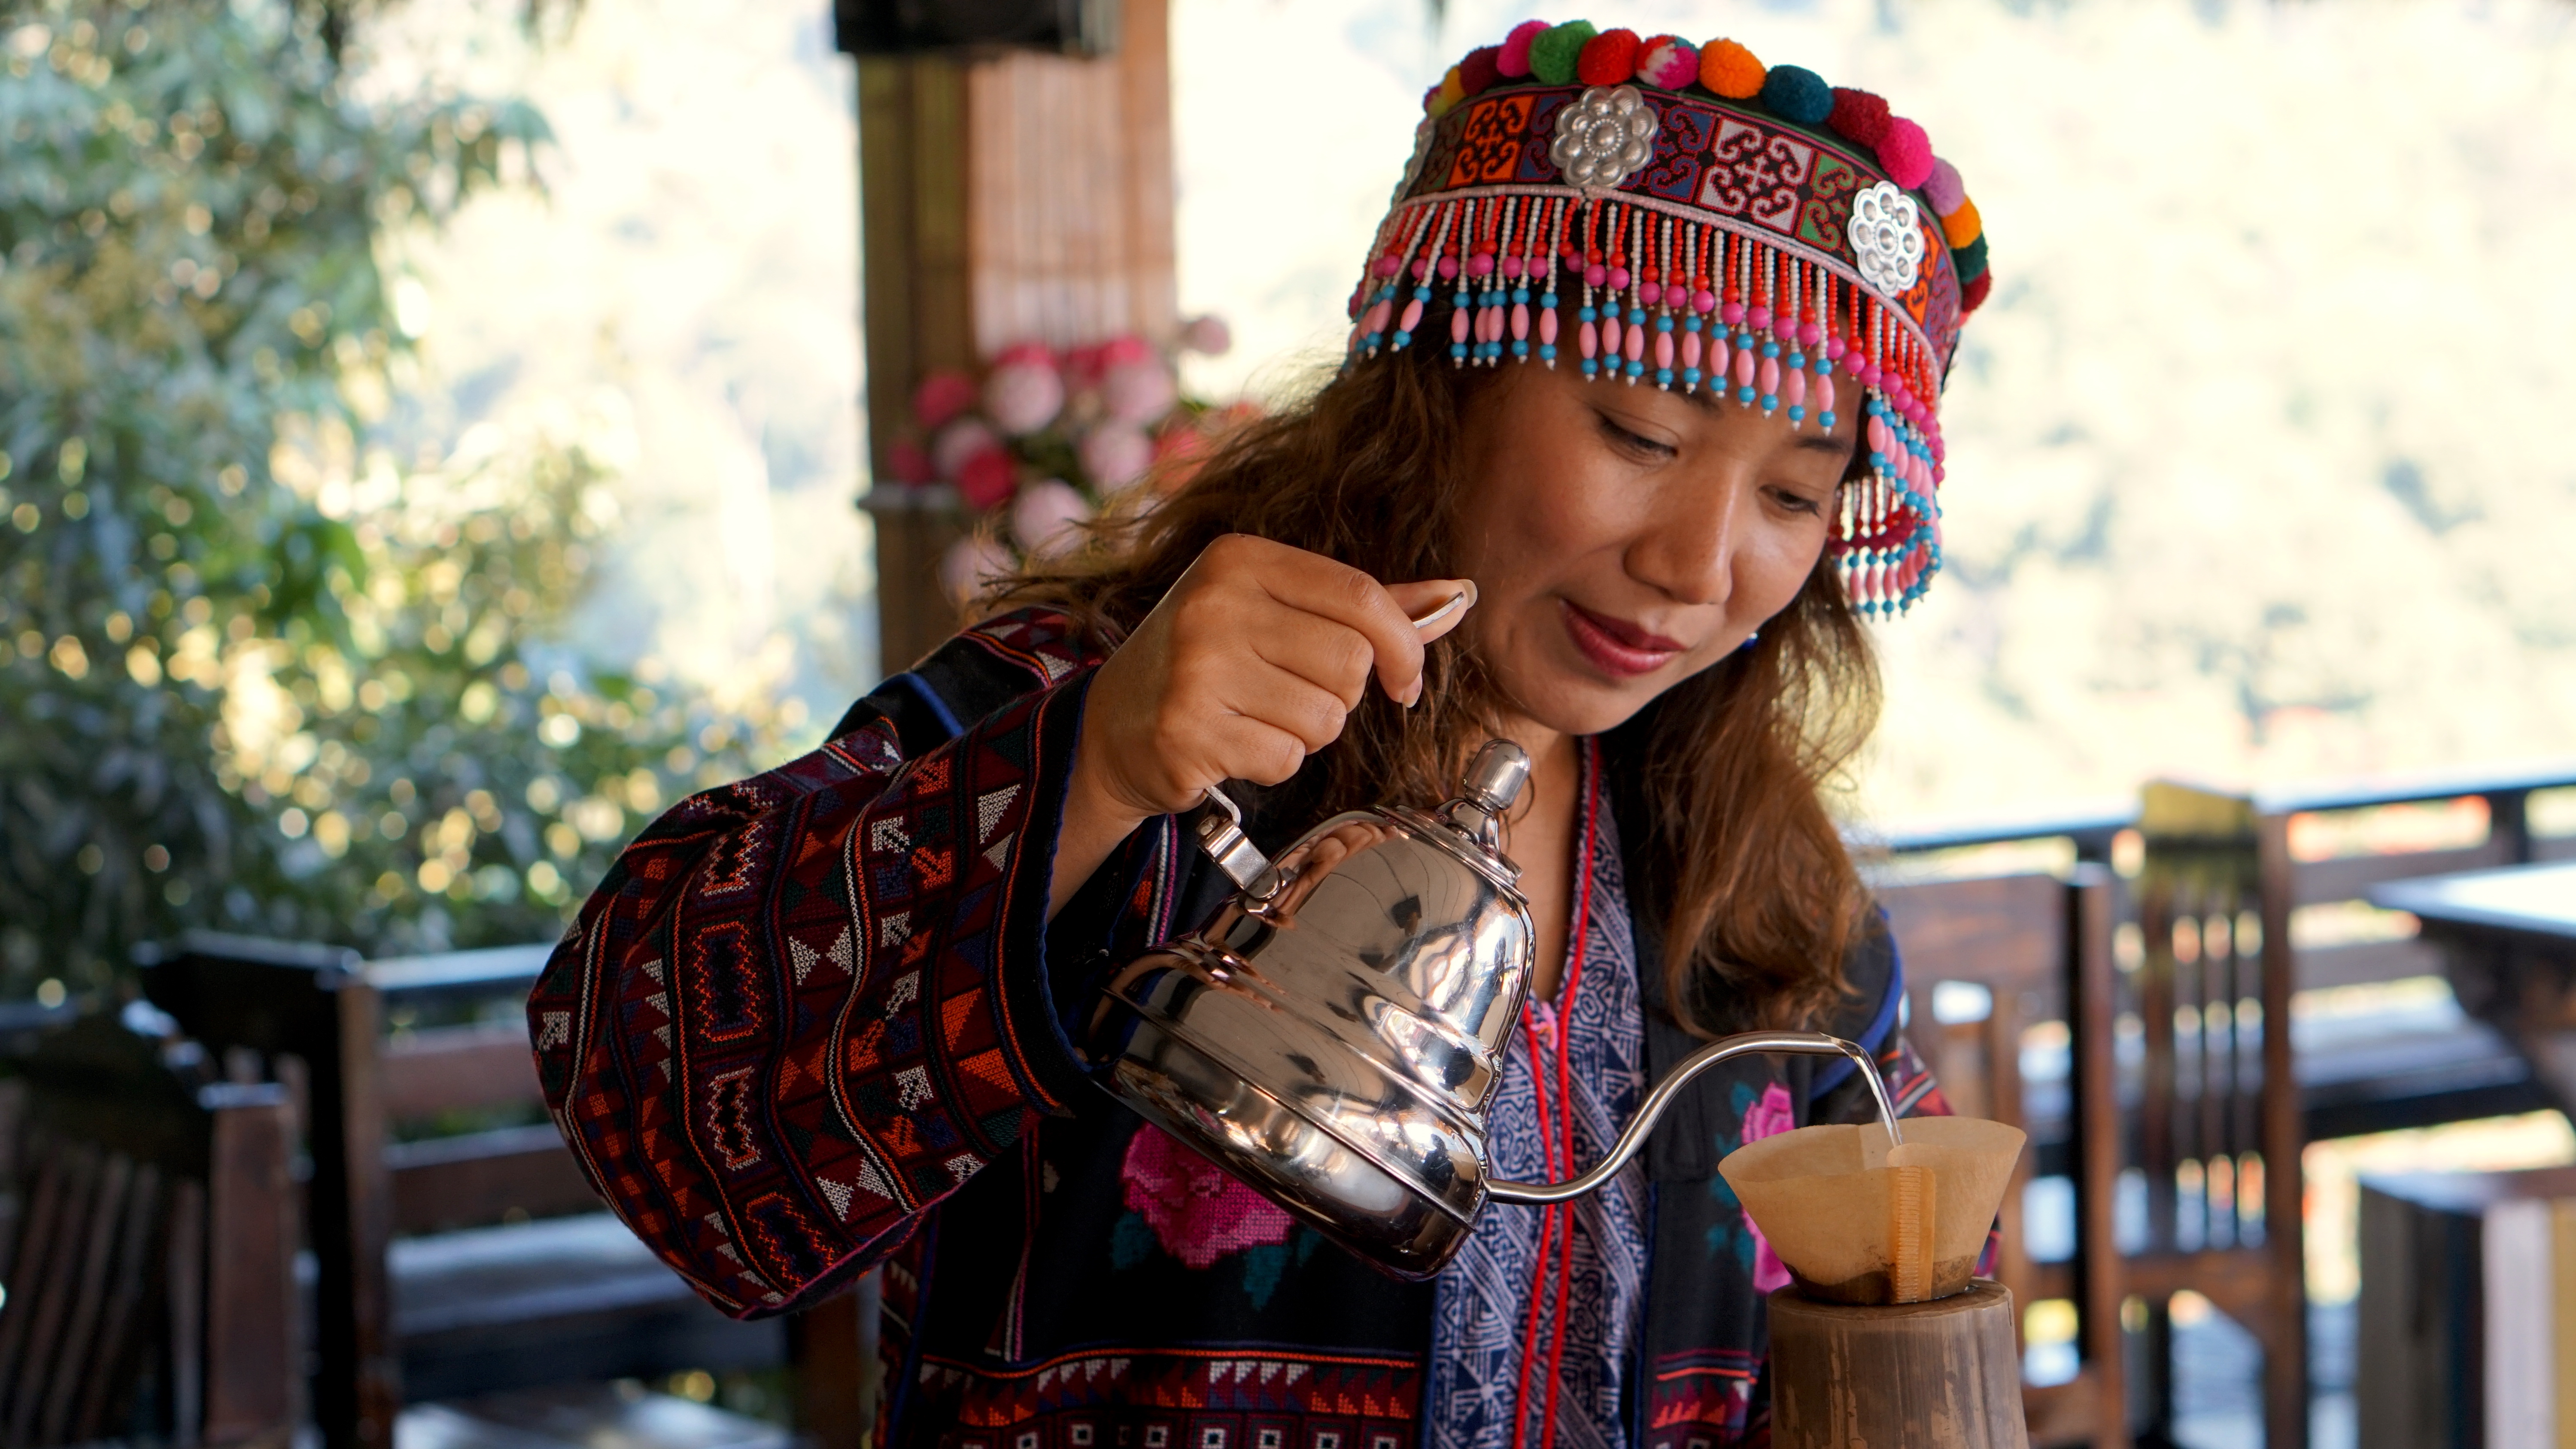 Local tourism leaders like Maew (pictured), are determined to preserve the authenticity of their culture, even as they embrace the chance to share their traditions with visitors, and develop sustainable livelihoods for the community.